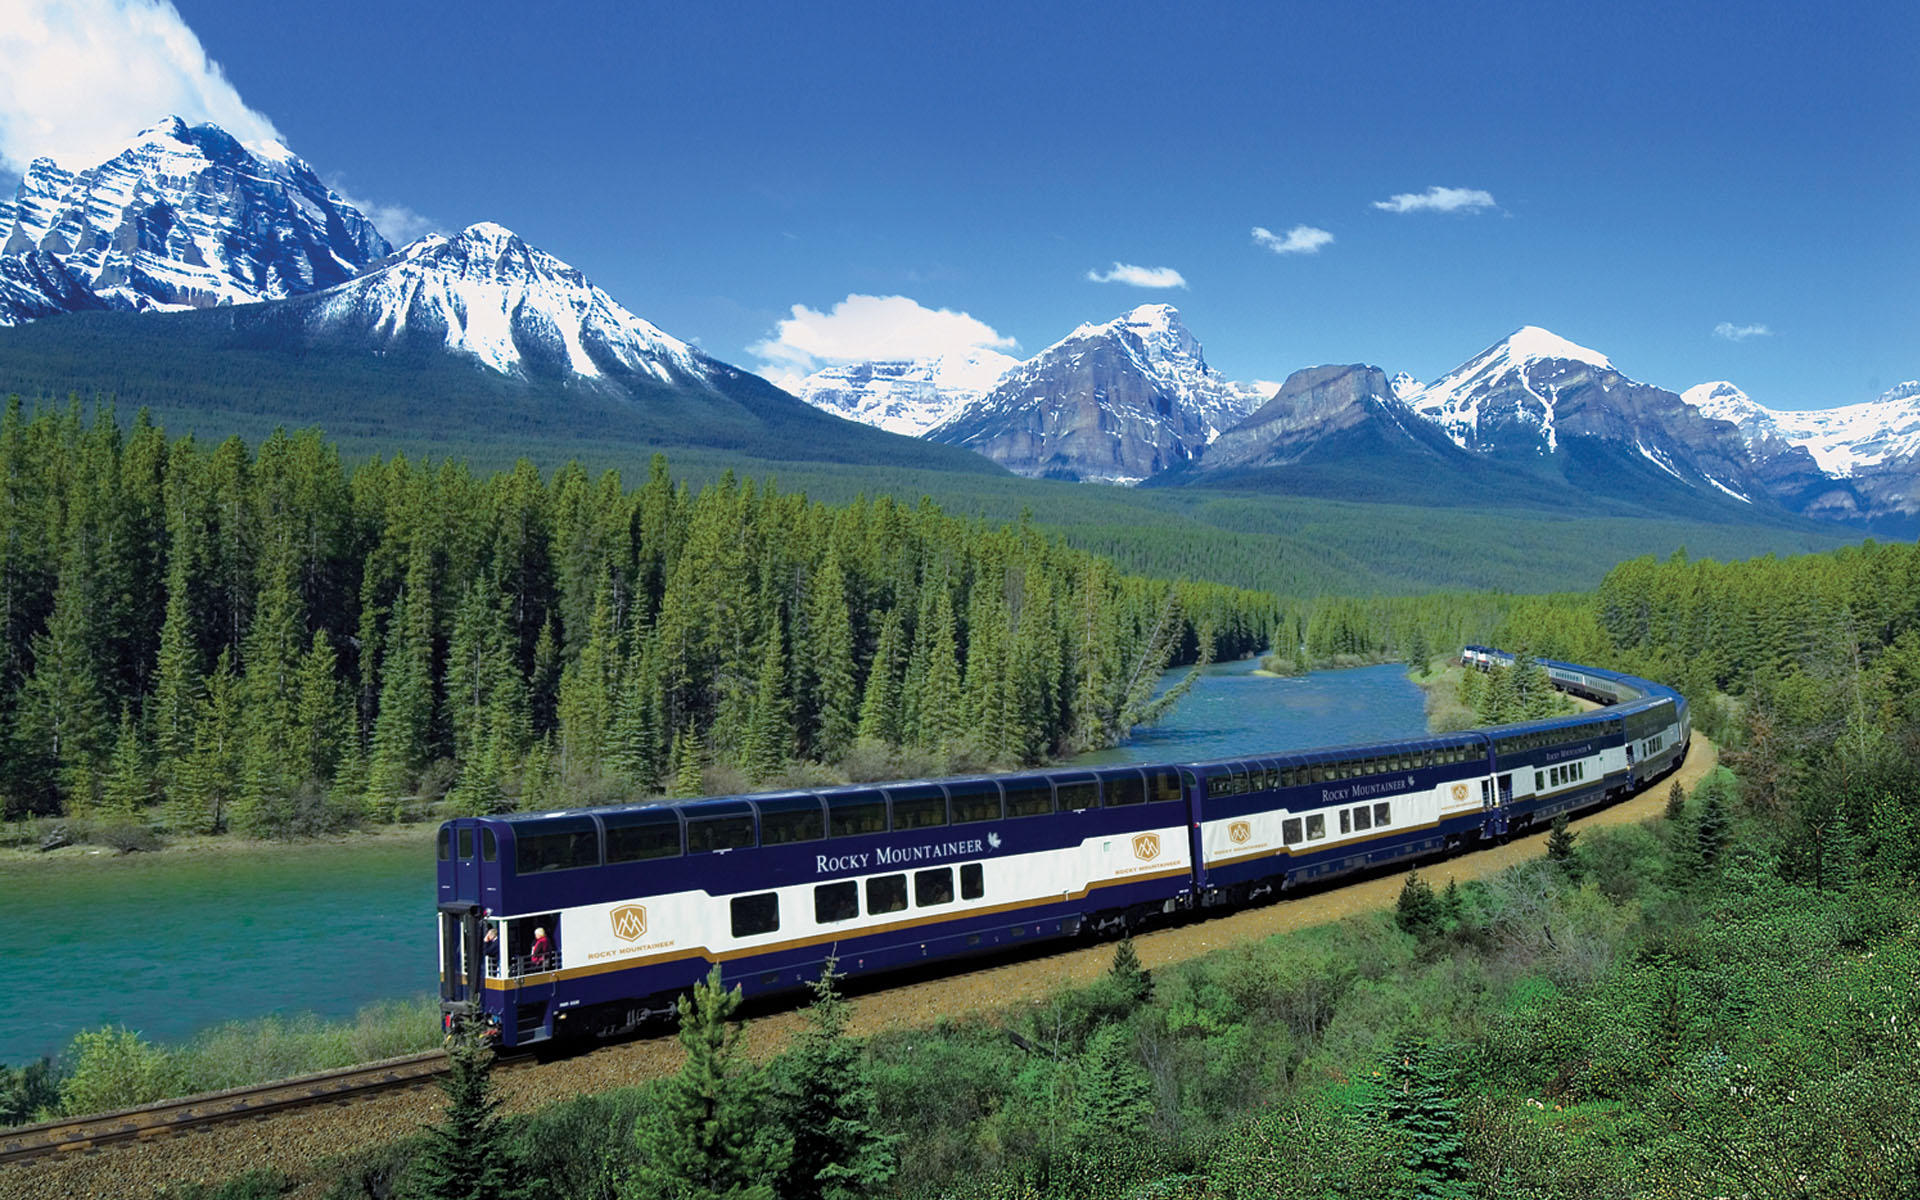 To download click on Canada Vacation Train HD Wallpaper then choose